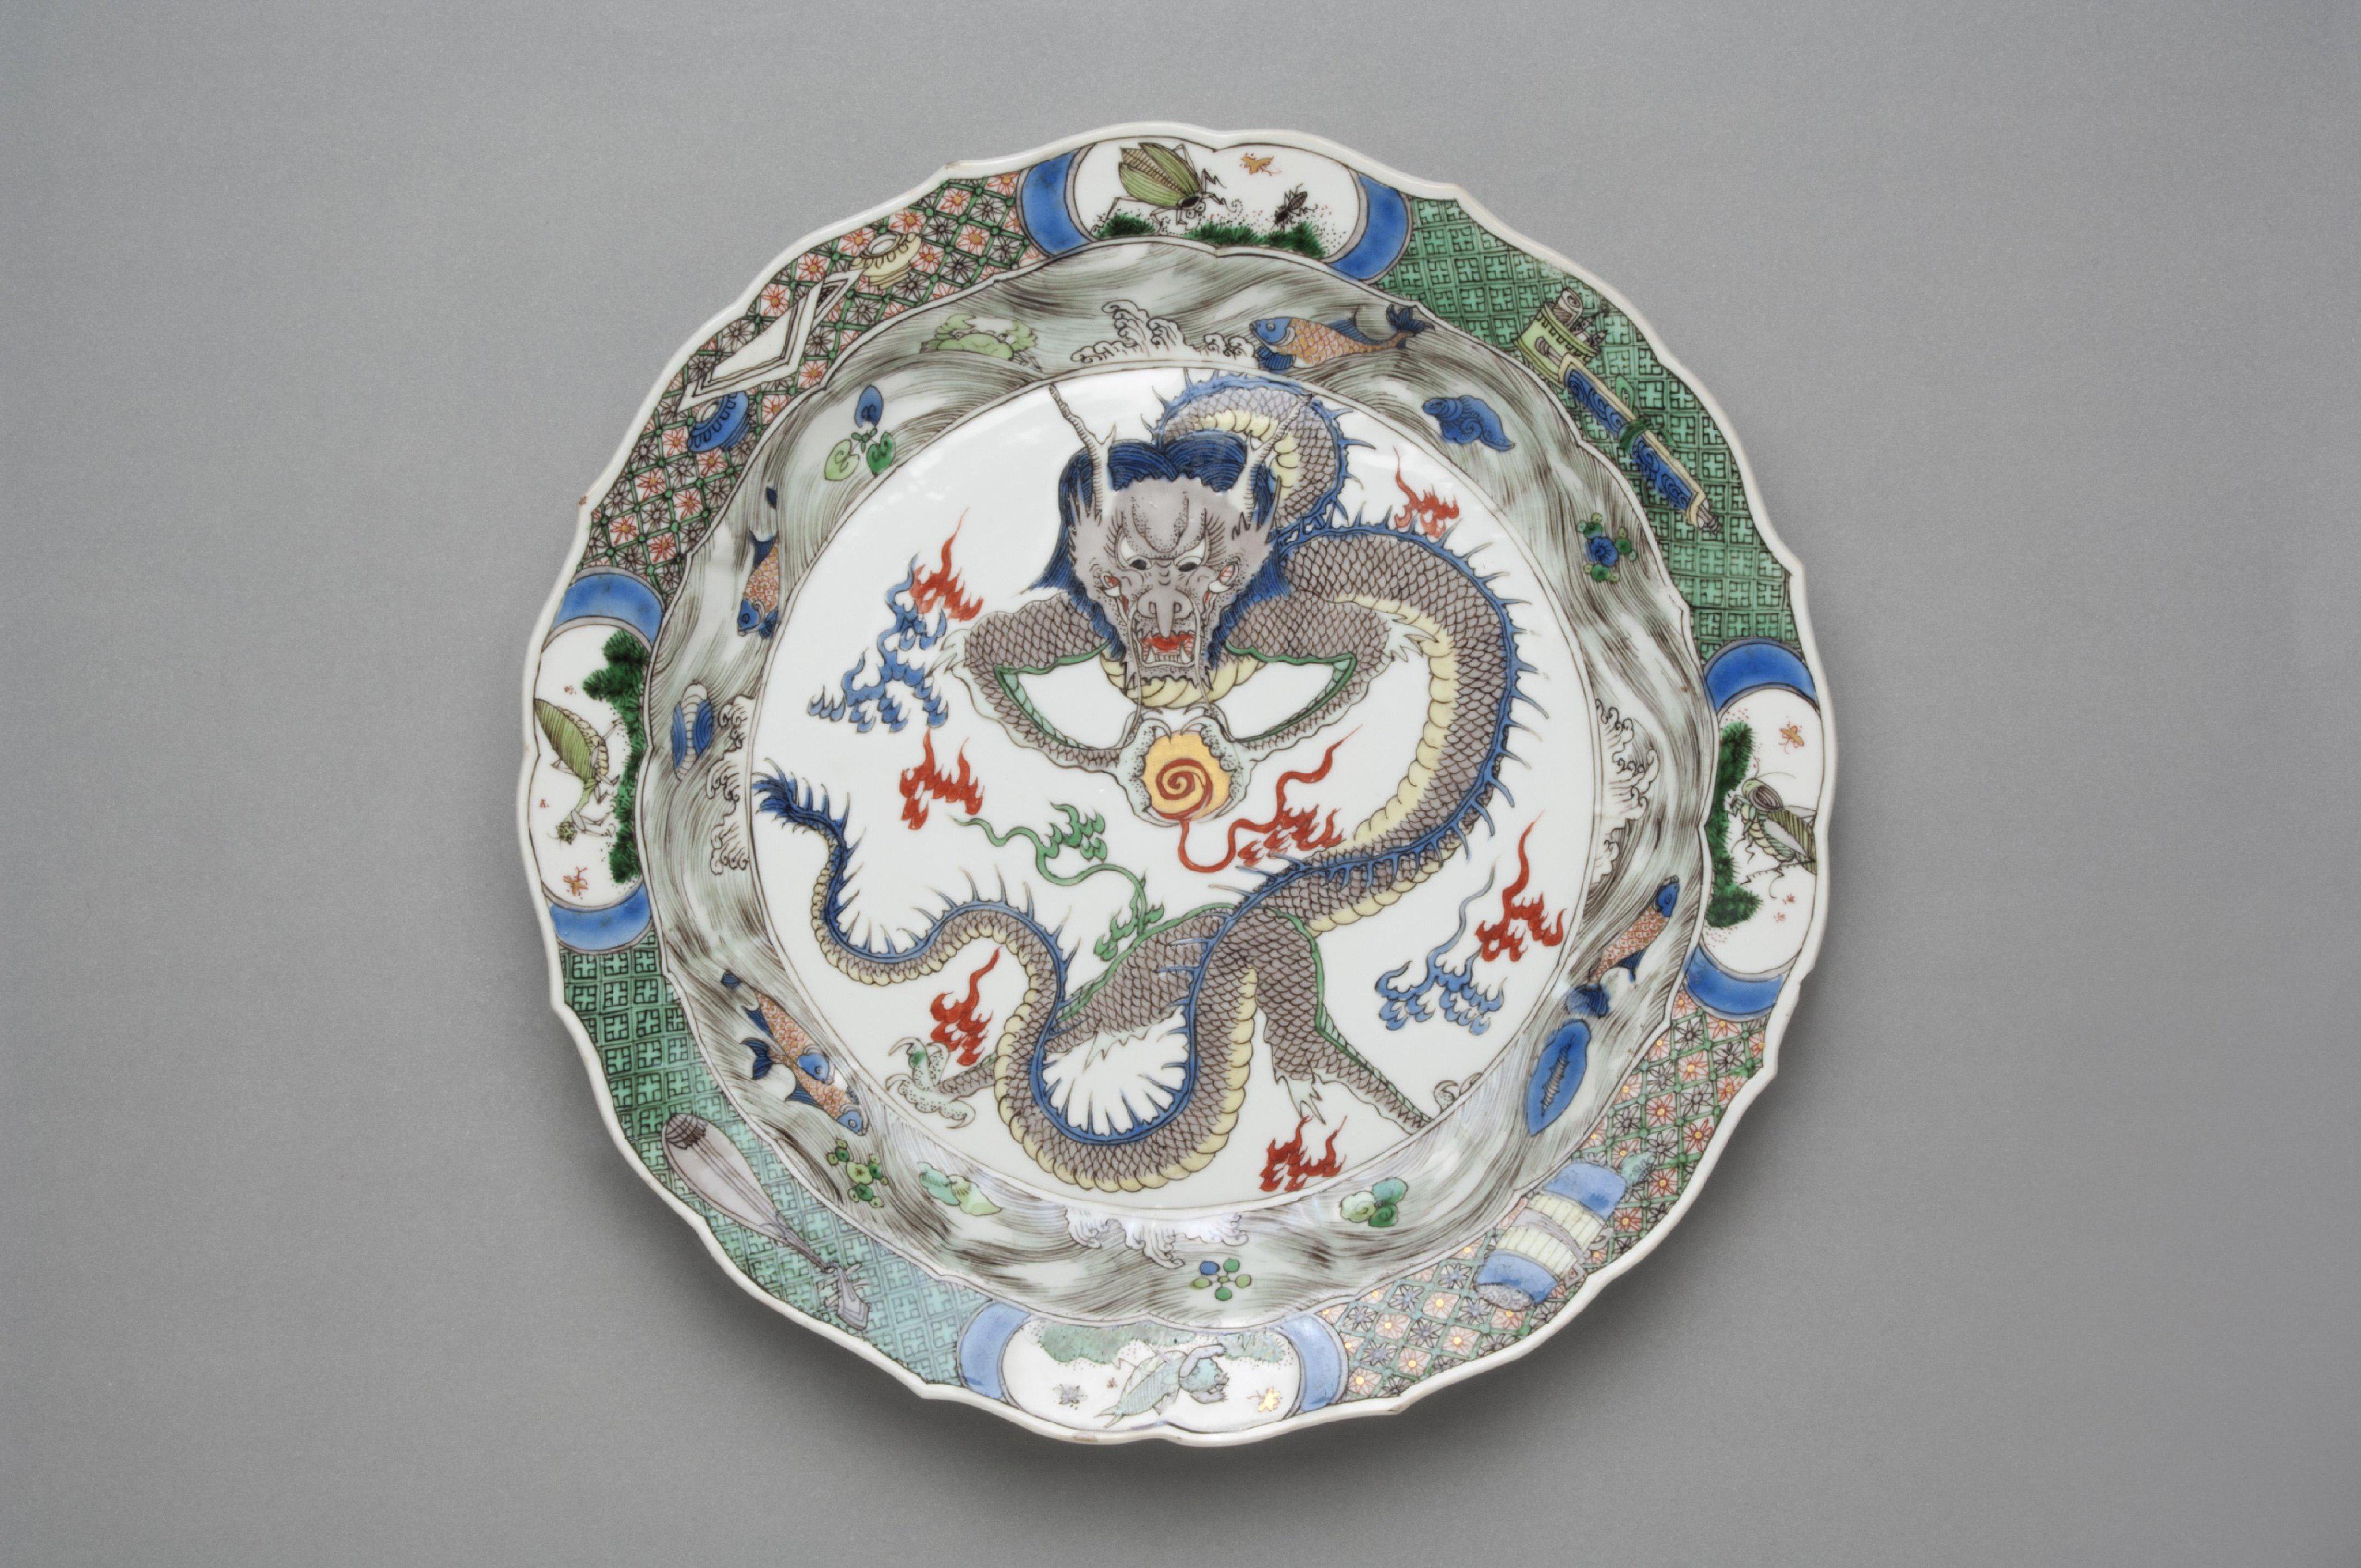 Dish with dragon grasping flaming pearl. Porcelain with overglaze enamel decoration. Qing dynasty Chinese, Kangxi period (1662-1722). Philadelphia Museum of Art collection.jpeg